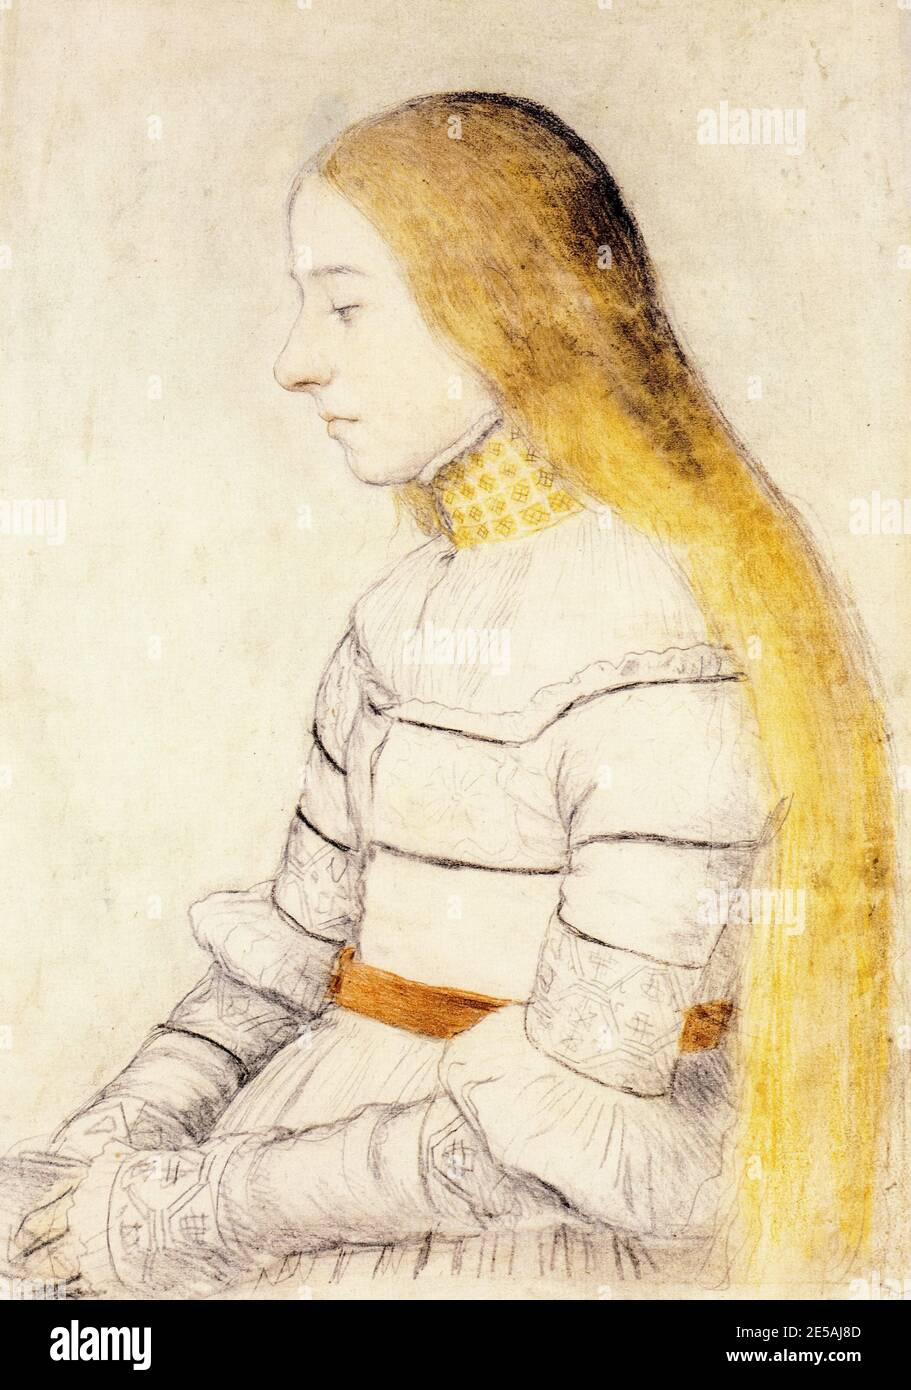 Hans Holbein the Younger, Anna Meyer, portrait drawing, 1525-1526 Stock Photo